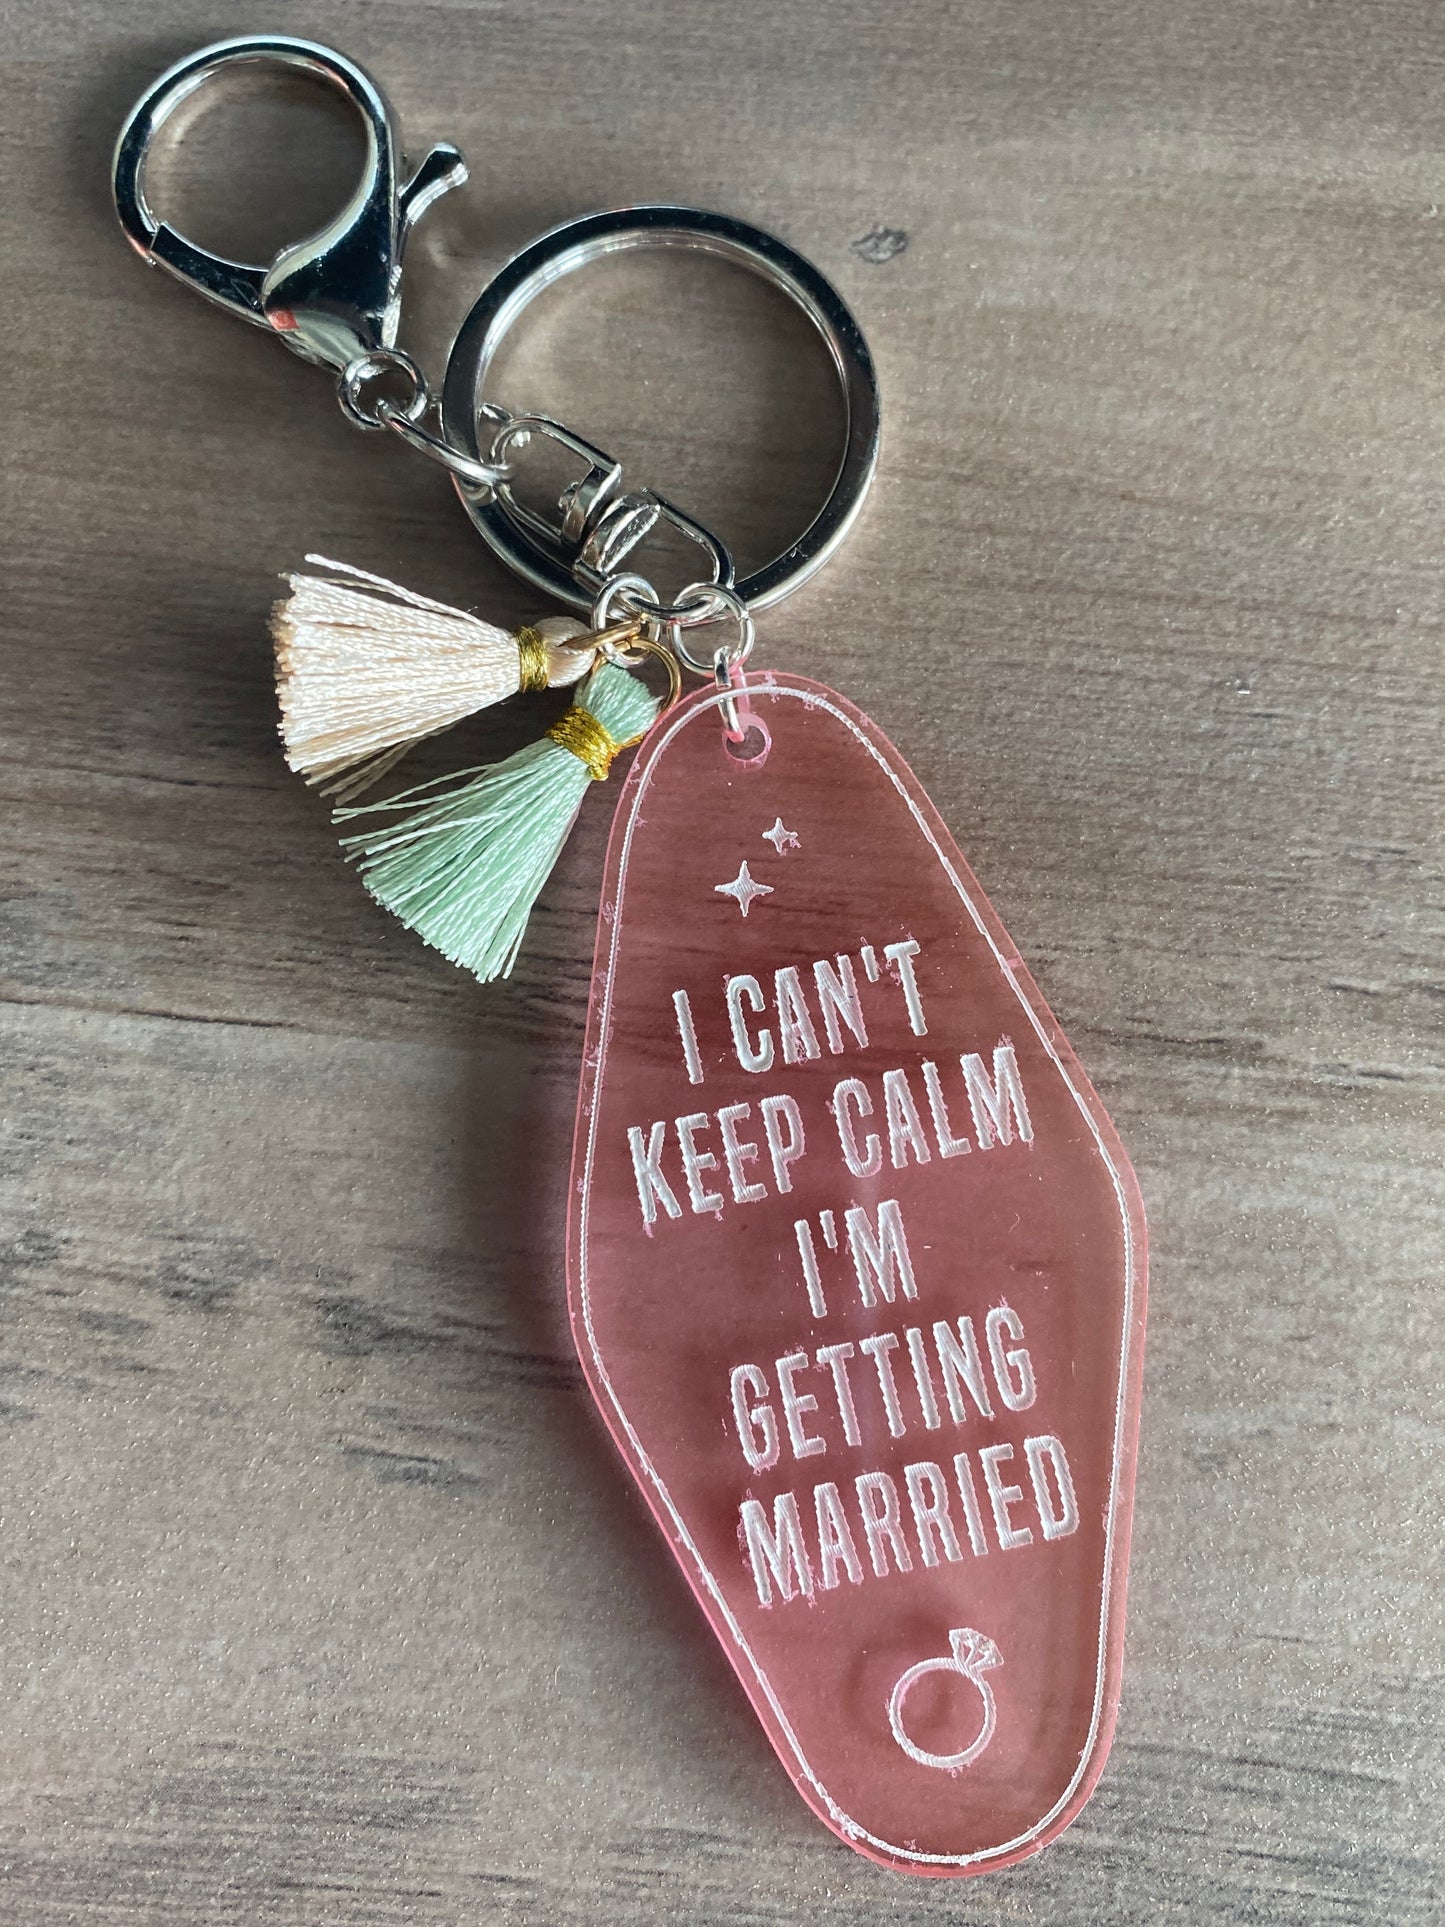 I Can't Keep Calm, I'm Getting Married - Vintage Style Acrylic Keychain